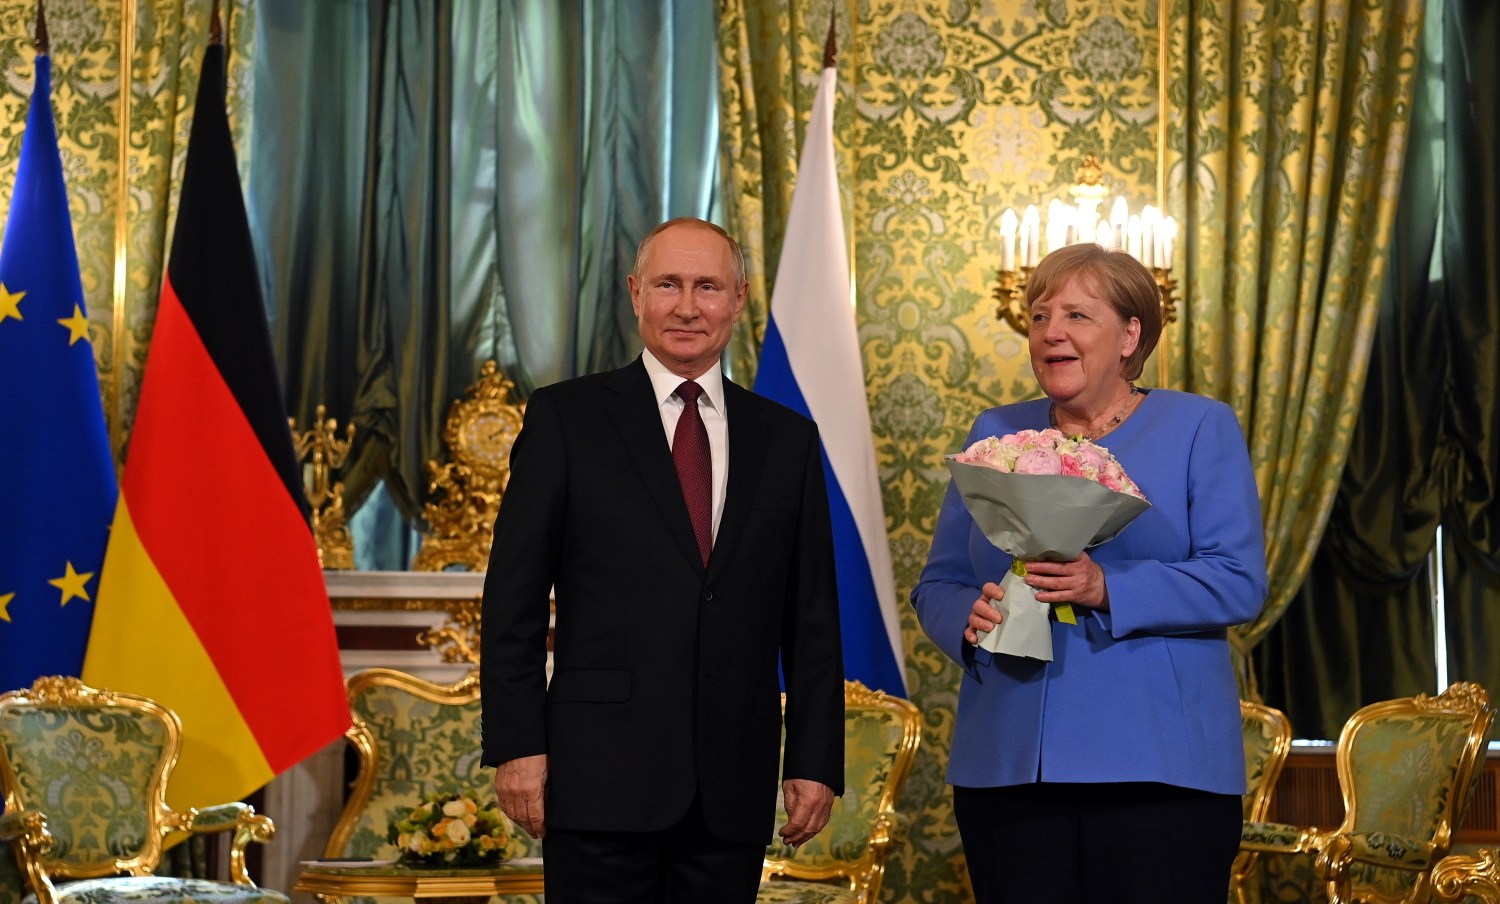 Russian President Vladimir Putin and German Chancellor Angela Merkel pose for a picture during a meeting at the Kremlin in Moscow, Russia August 20, 2021. Sputnik/Kremlin via REUTERS ATTENTION EDITORS - THIS IMAGE WAS PROVIDED BY A THIRD PARTY.